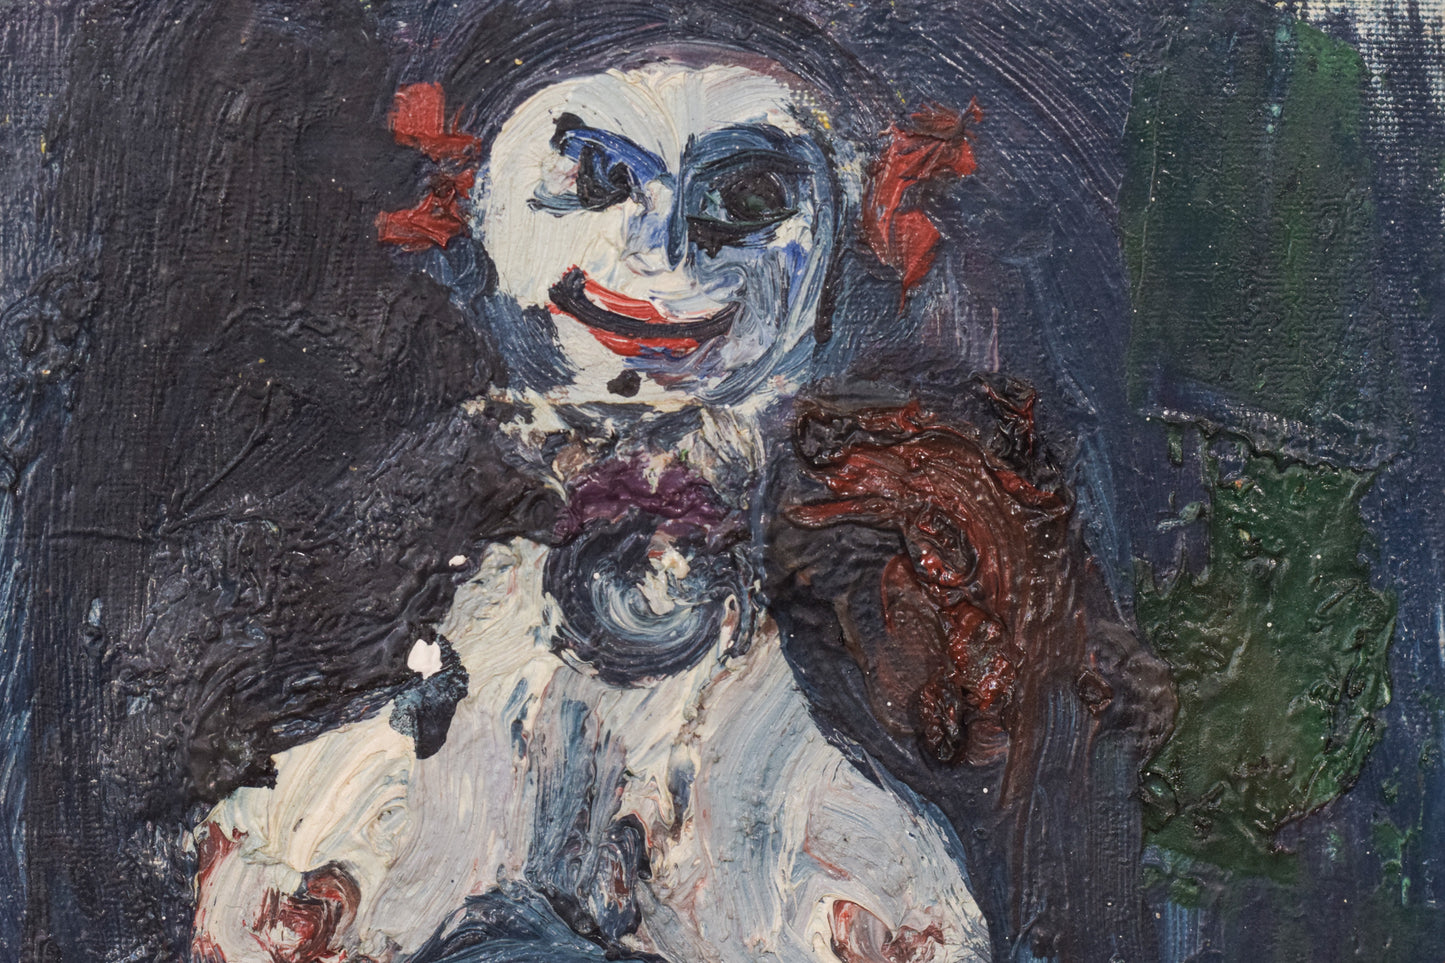 Expressionist - Oil Painting of a Clown